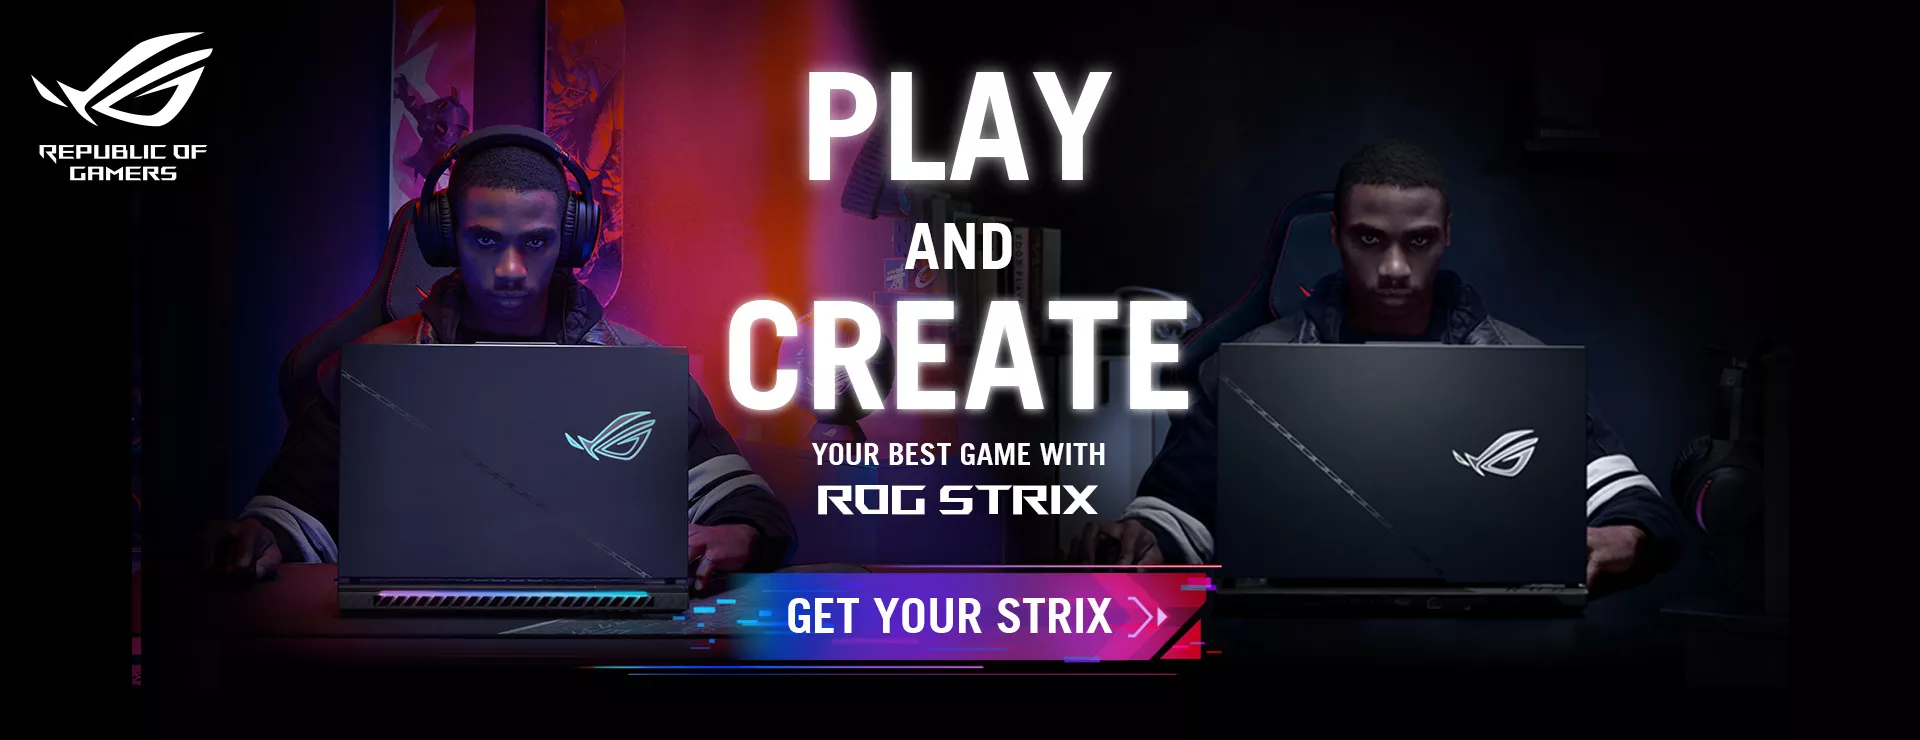 Two men are playing and creating their best games with ROG Strix laptops. Time to get your Strix.